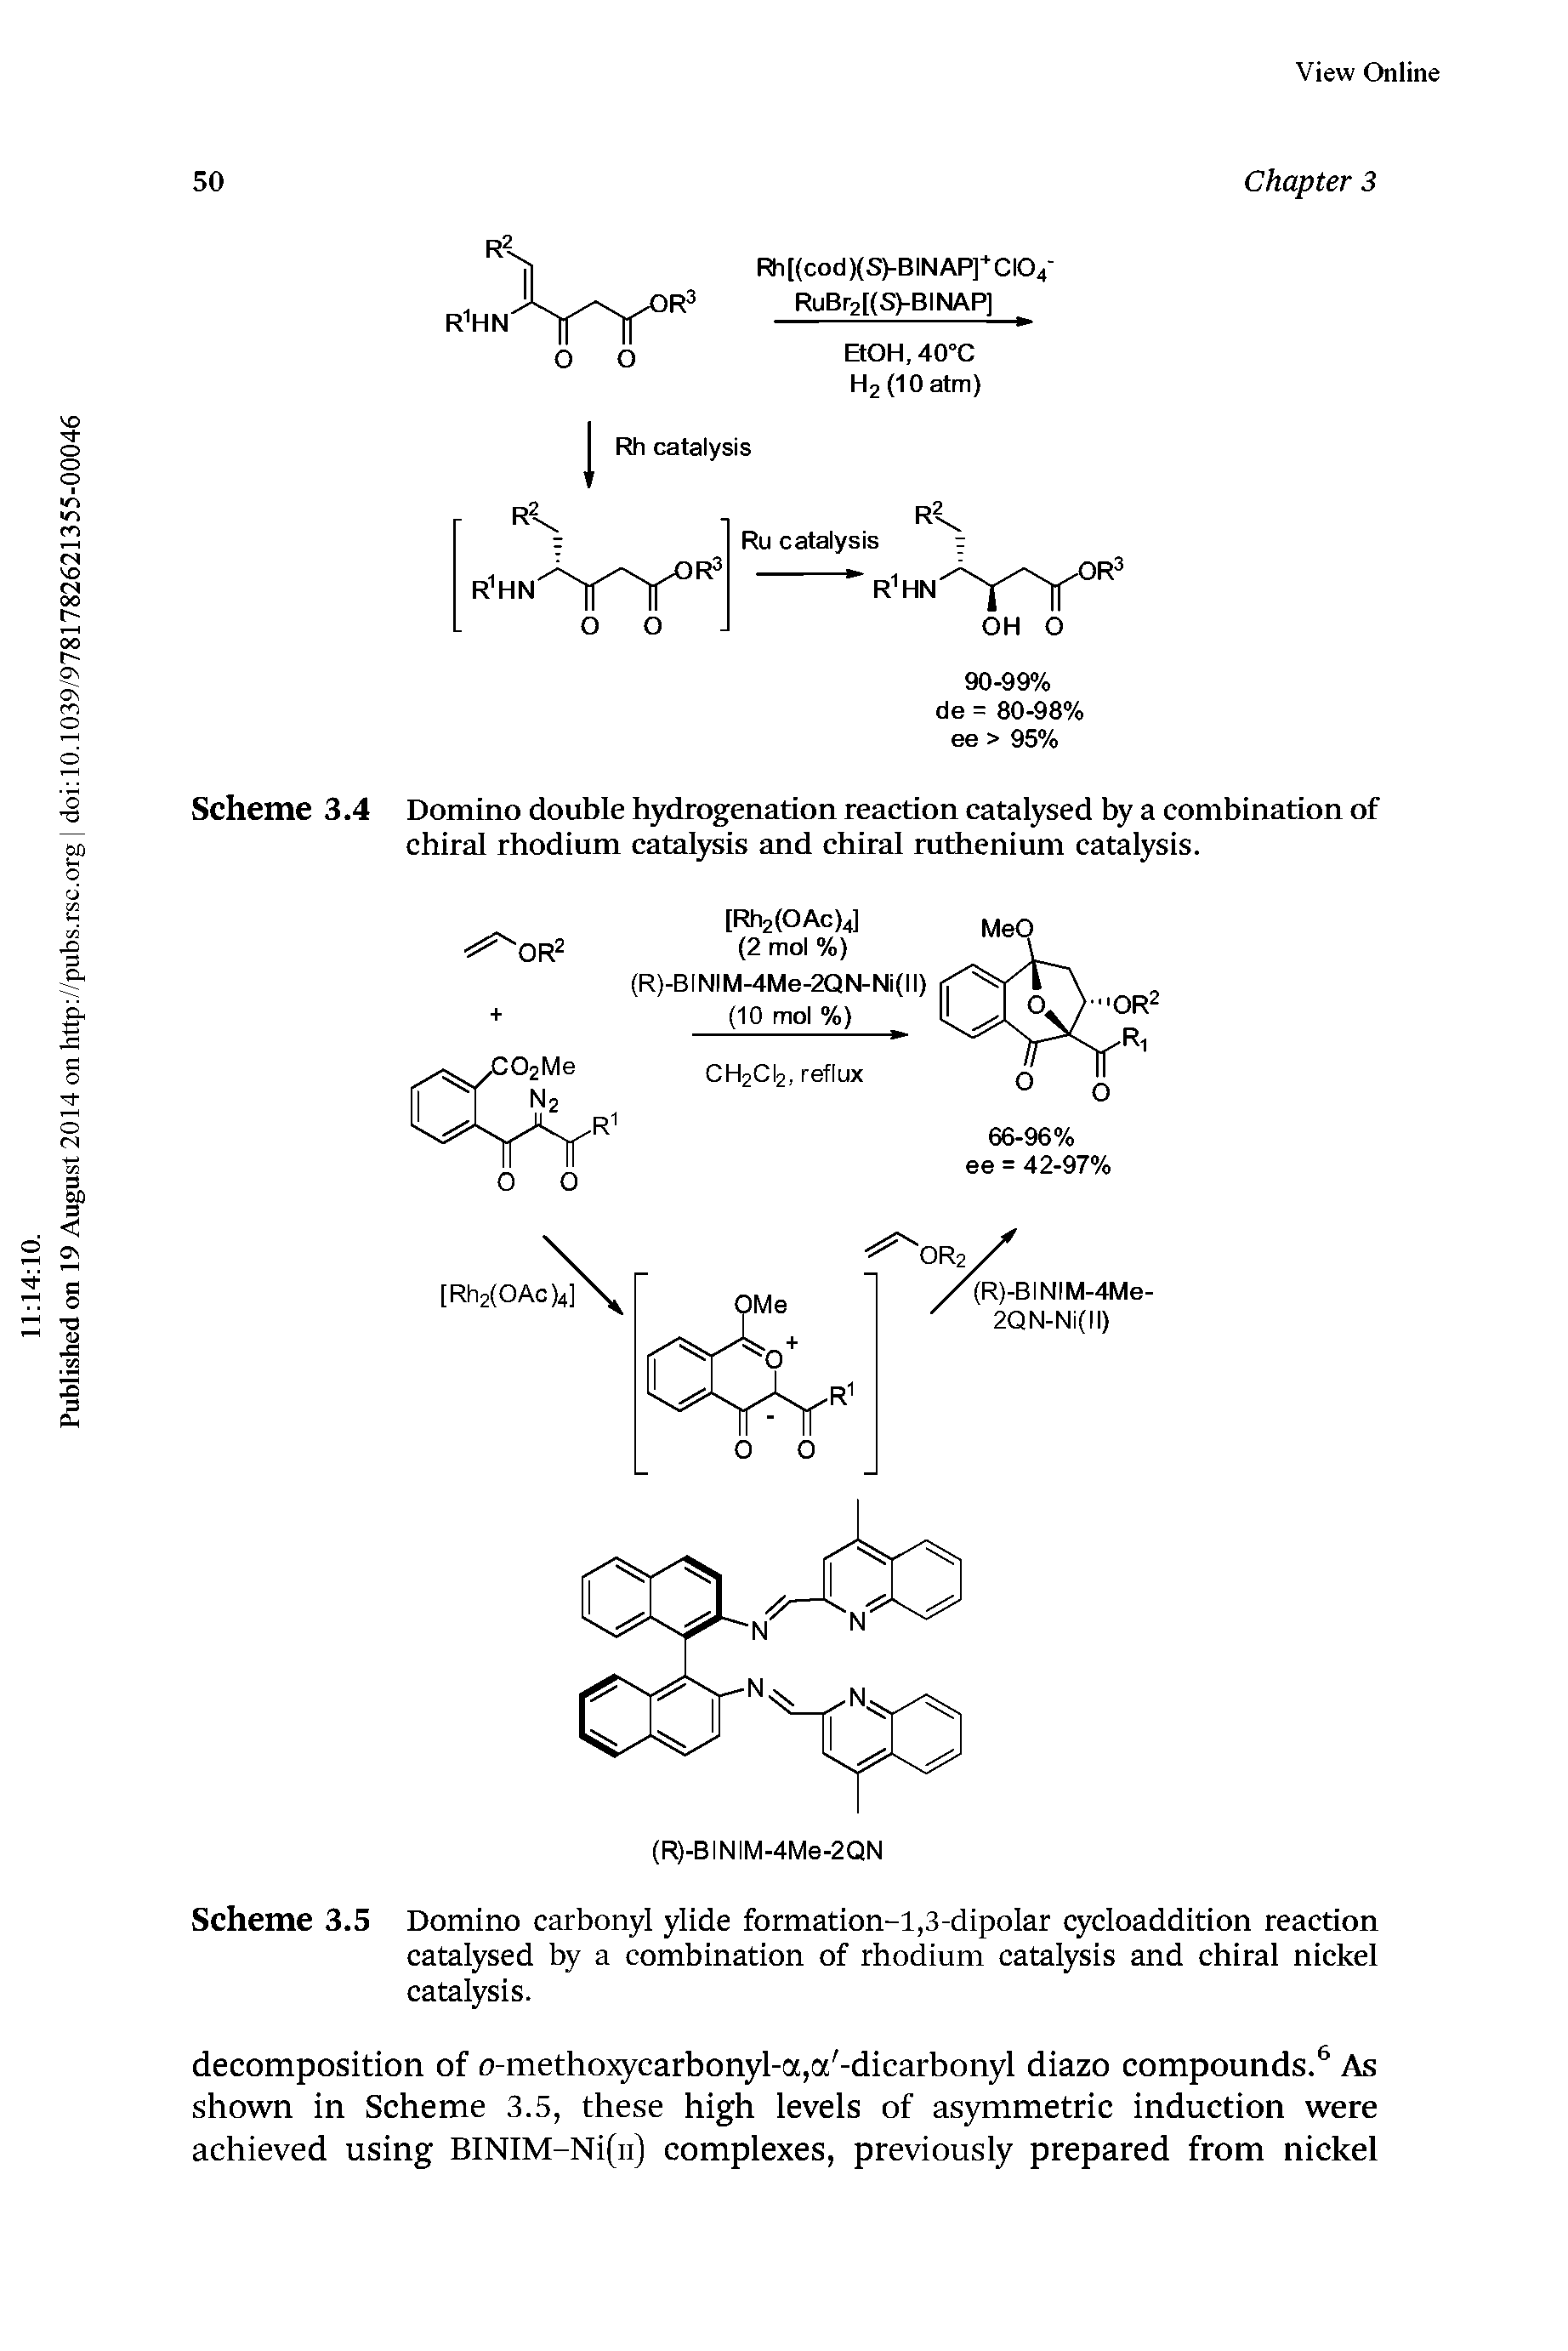 Scheme 3.4 Domino double hydrogenation reaction catalysed by a combination of chiral rhodium catalysis and chiral ruthenium catalysis.